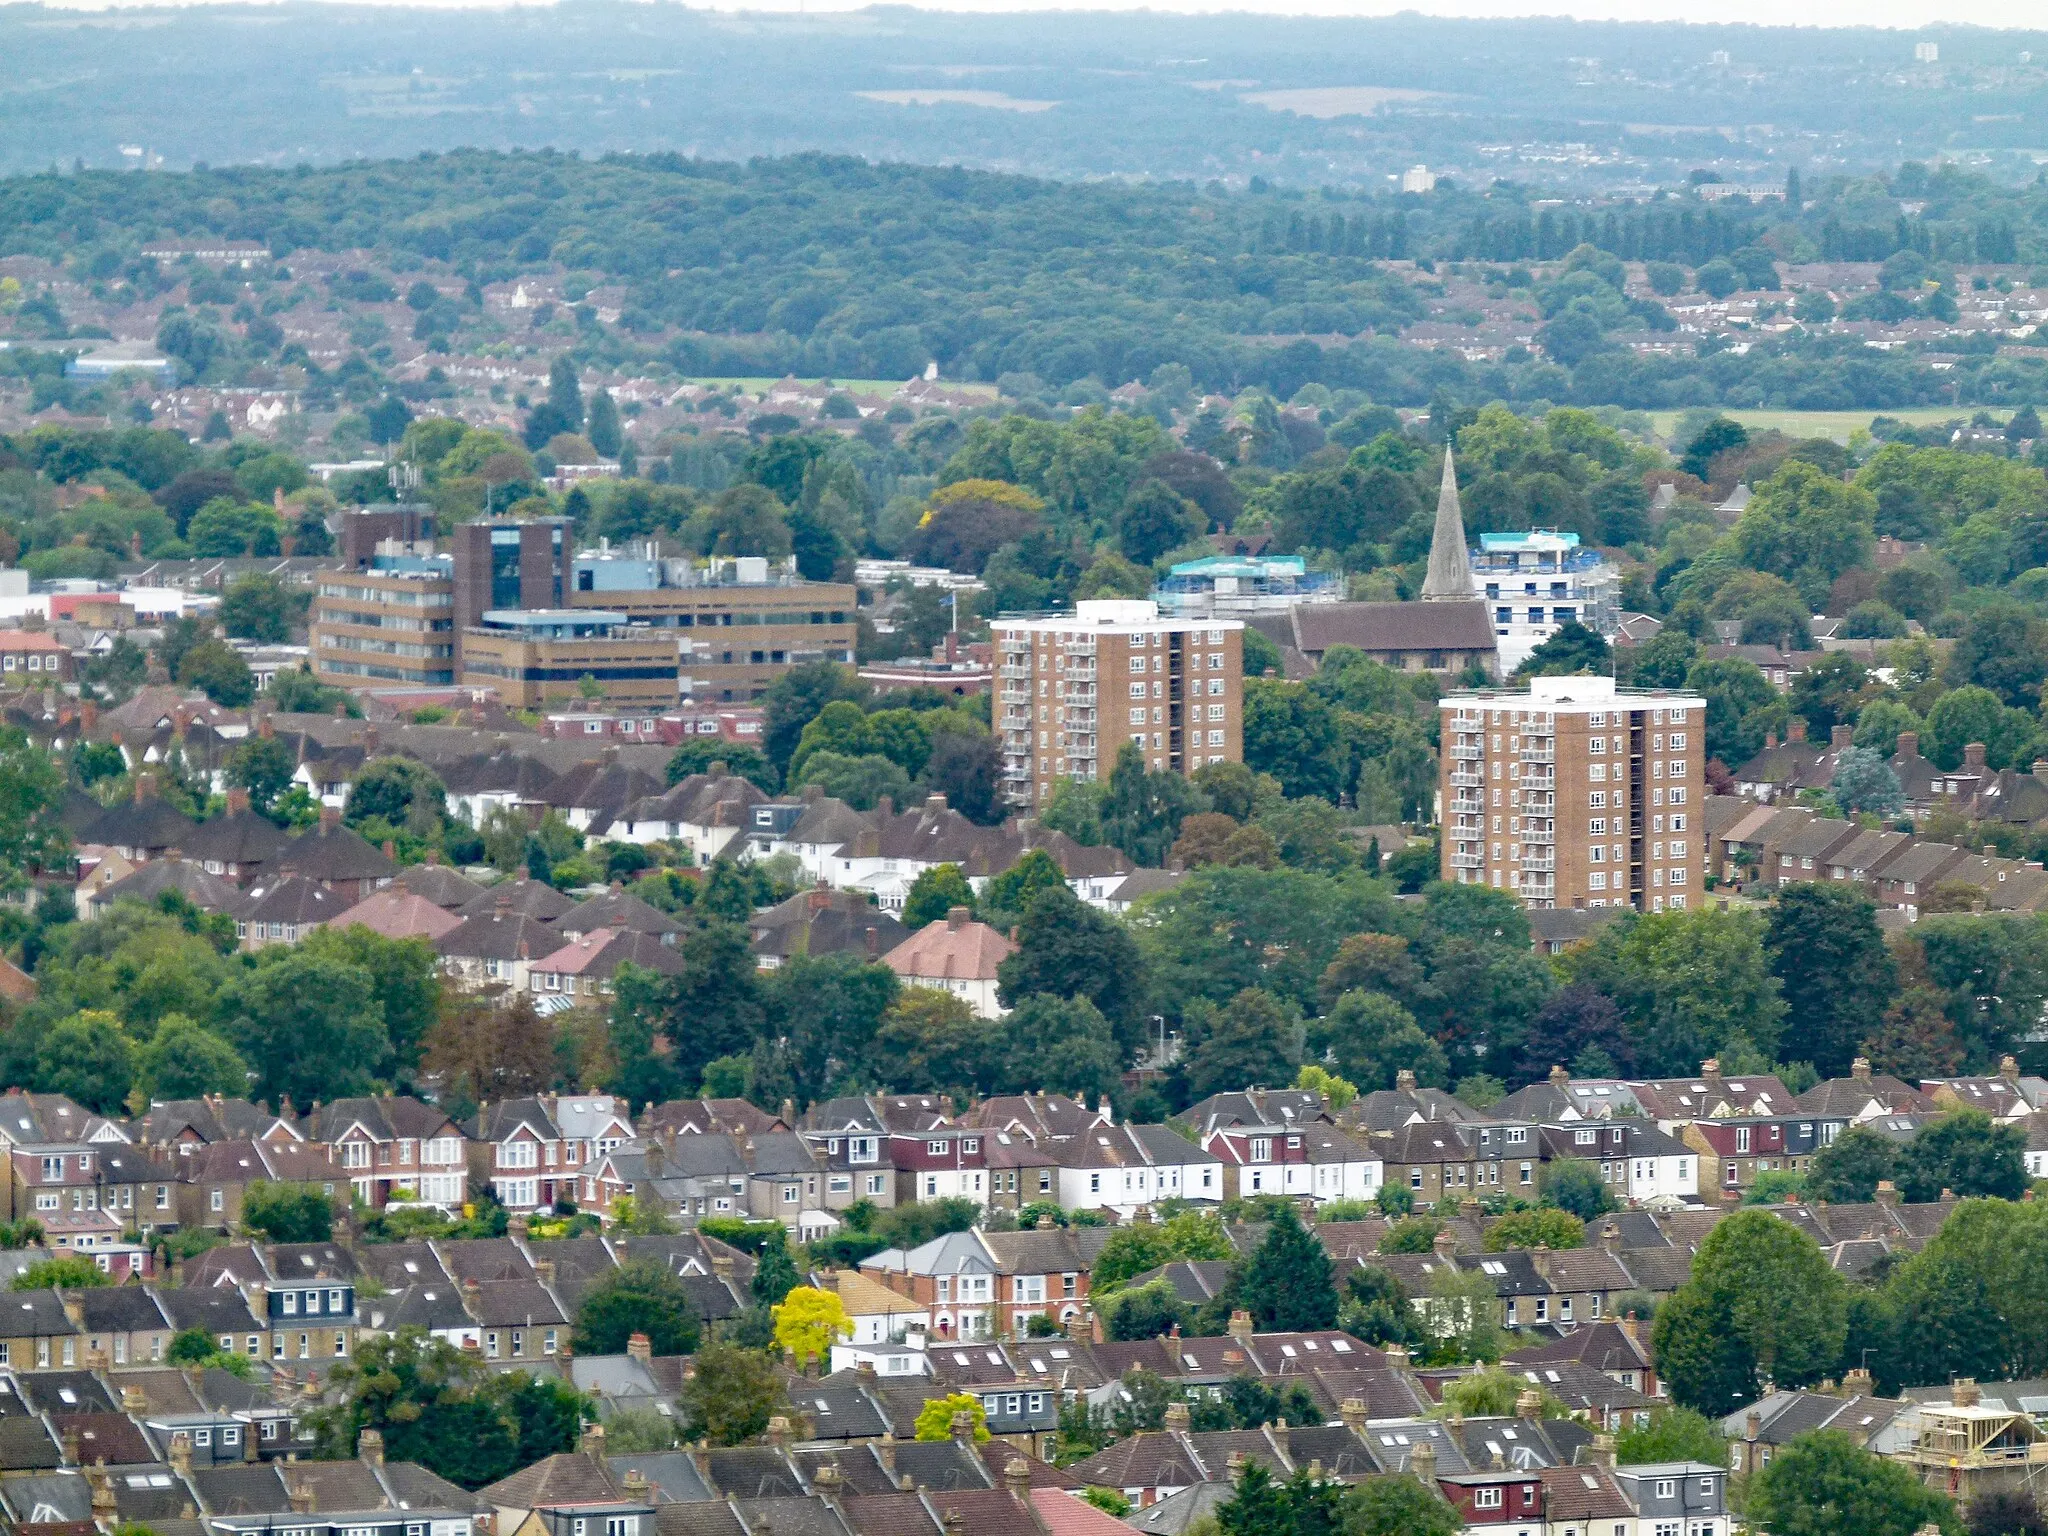 Photo showing: View towards the southwest (Eltham) from the top of Severndroog Castle, Shooters Hill, South east London, UK.